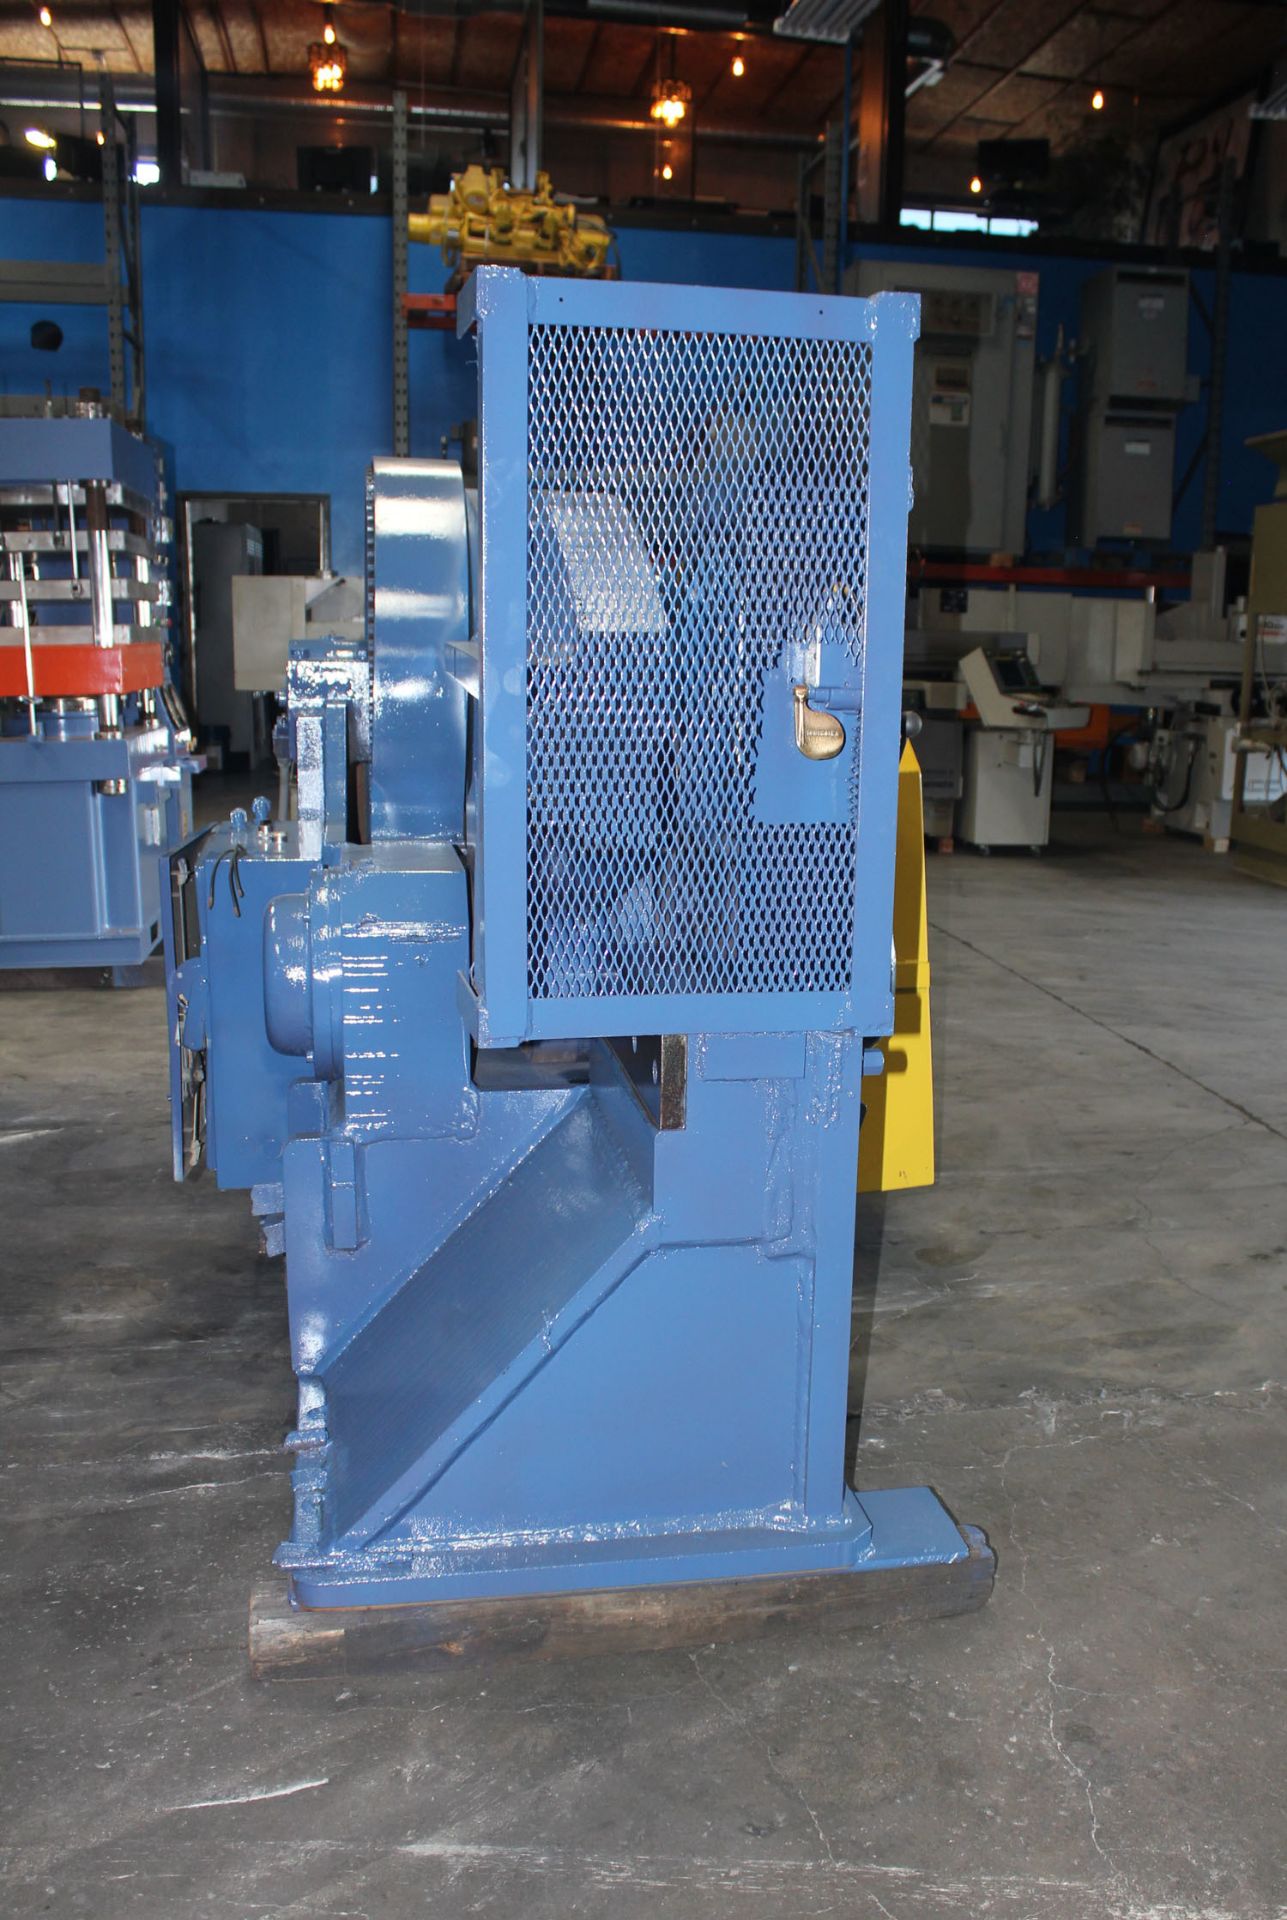 Hill Acme Alligator Shear | 24", Mdl: 22 A, S/N: N/A, Located In: Huntington Park, CA - 4763 - Image 15 of 18